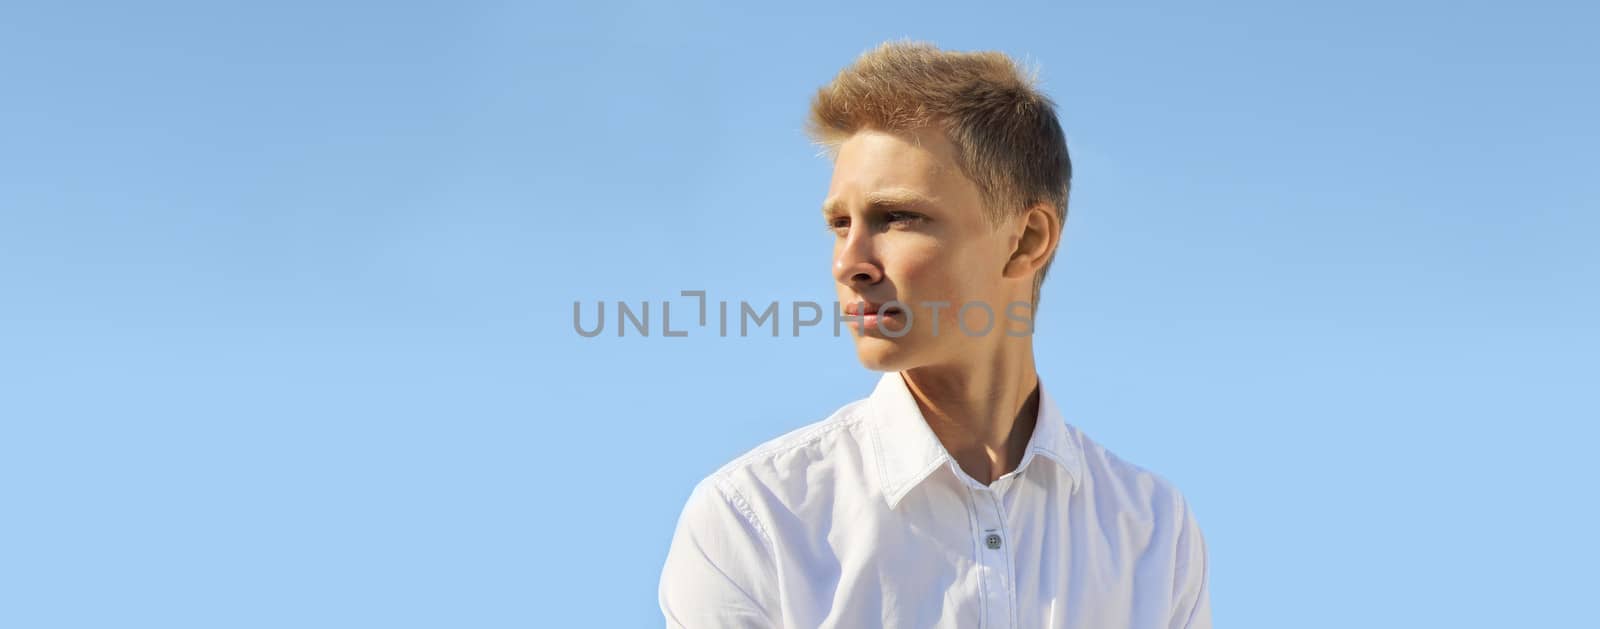 Handsome blond man on blue sky background at sunny day